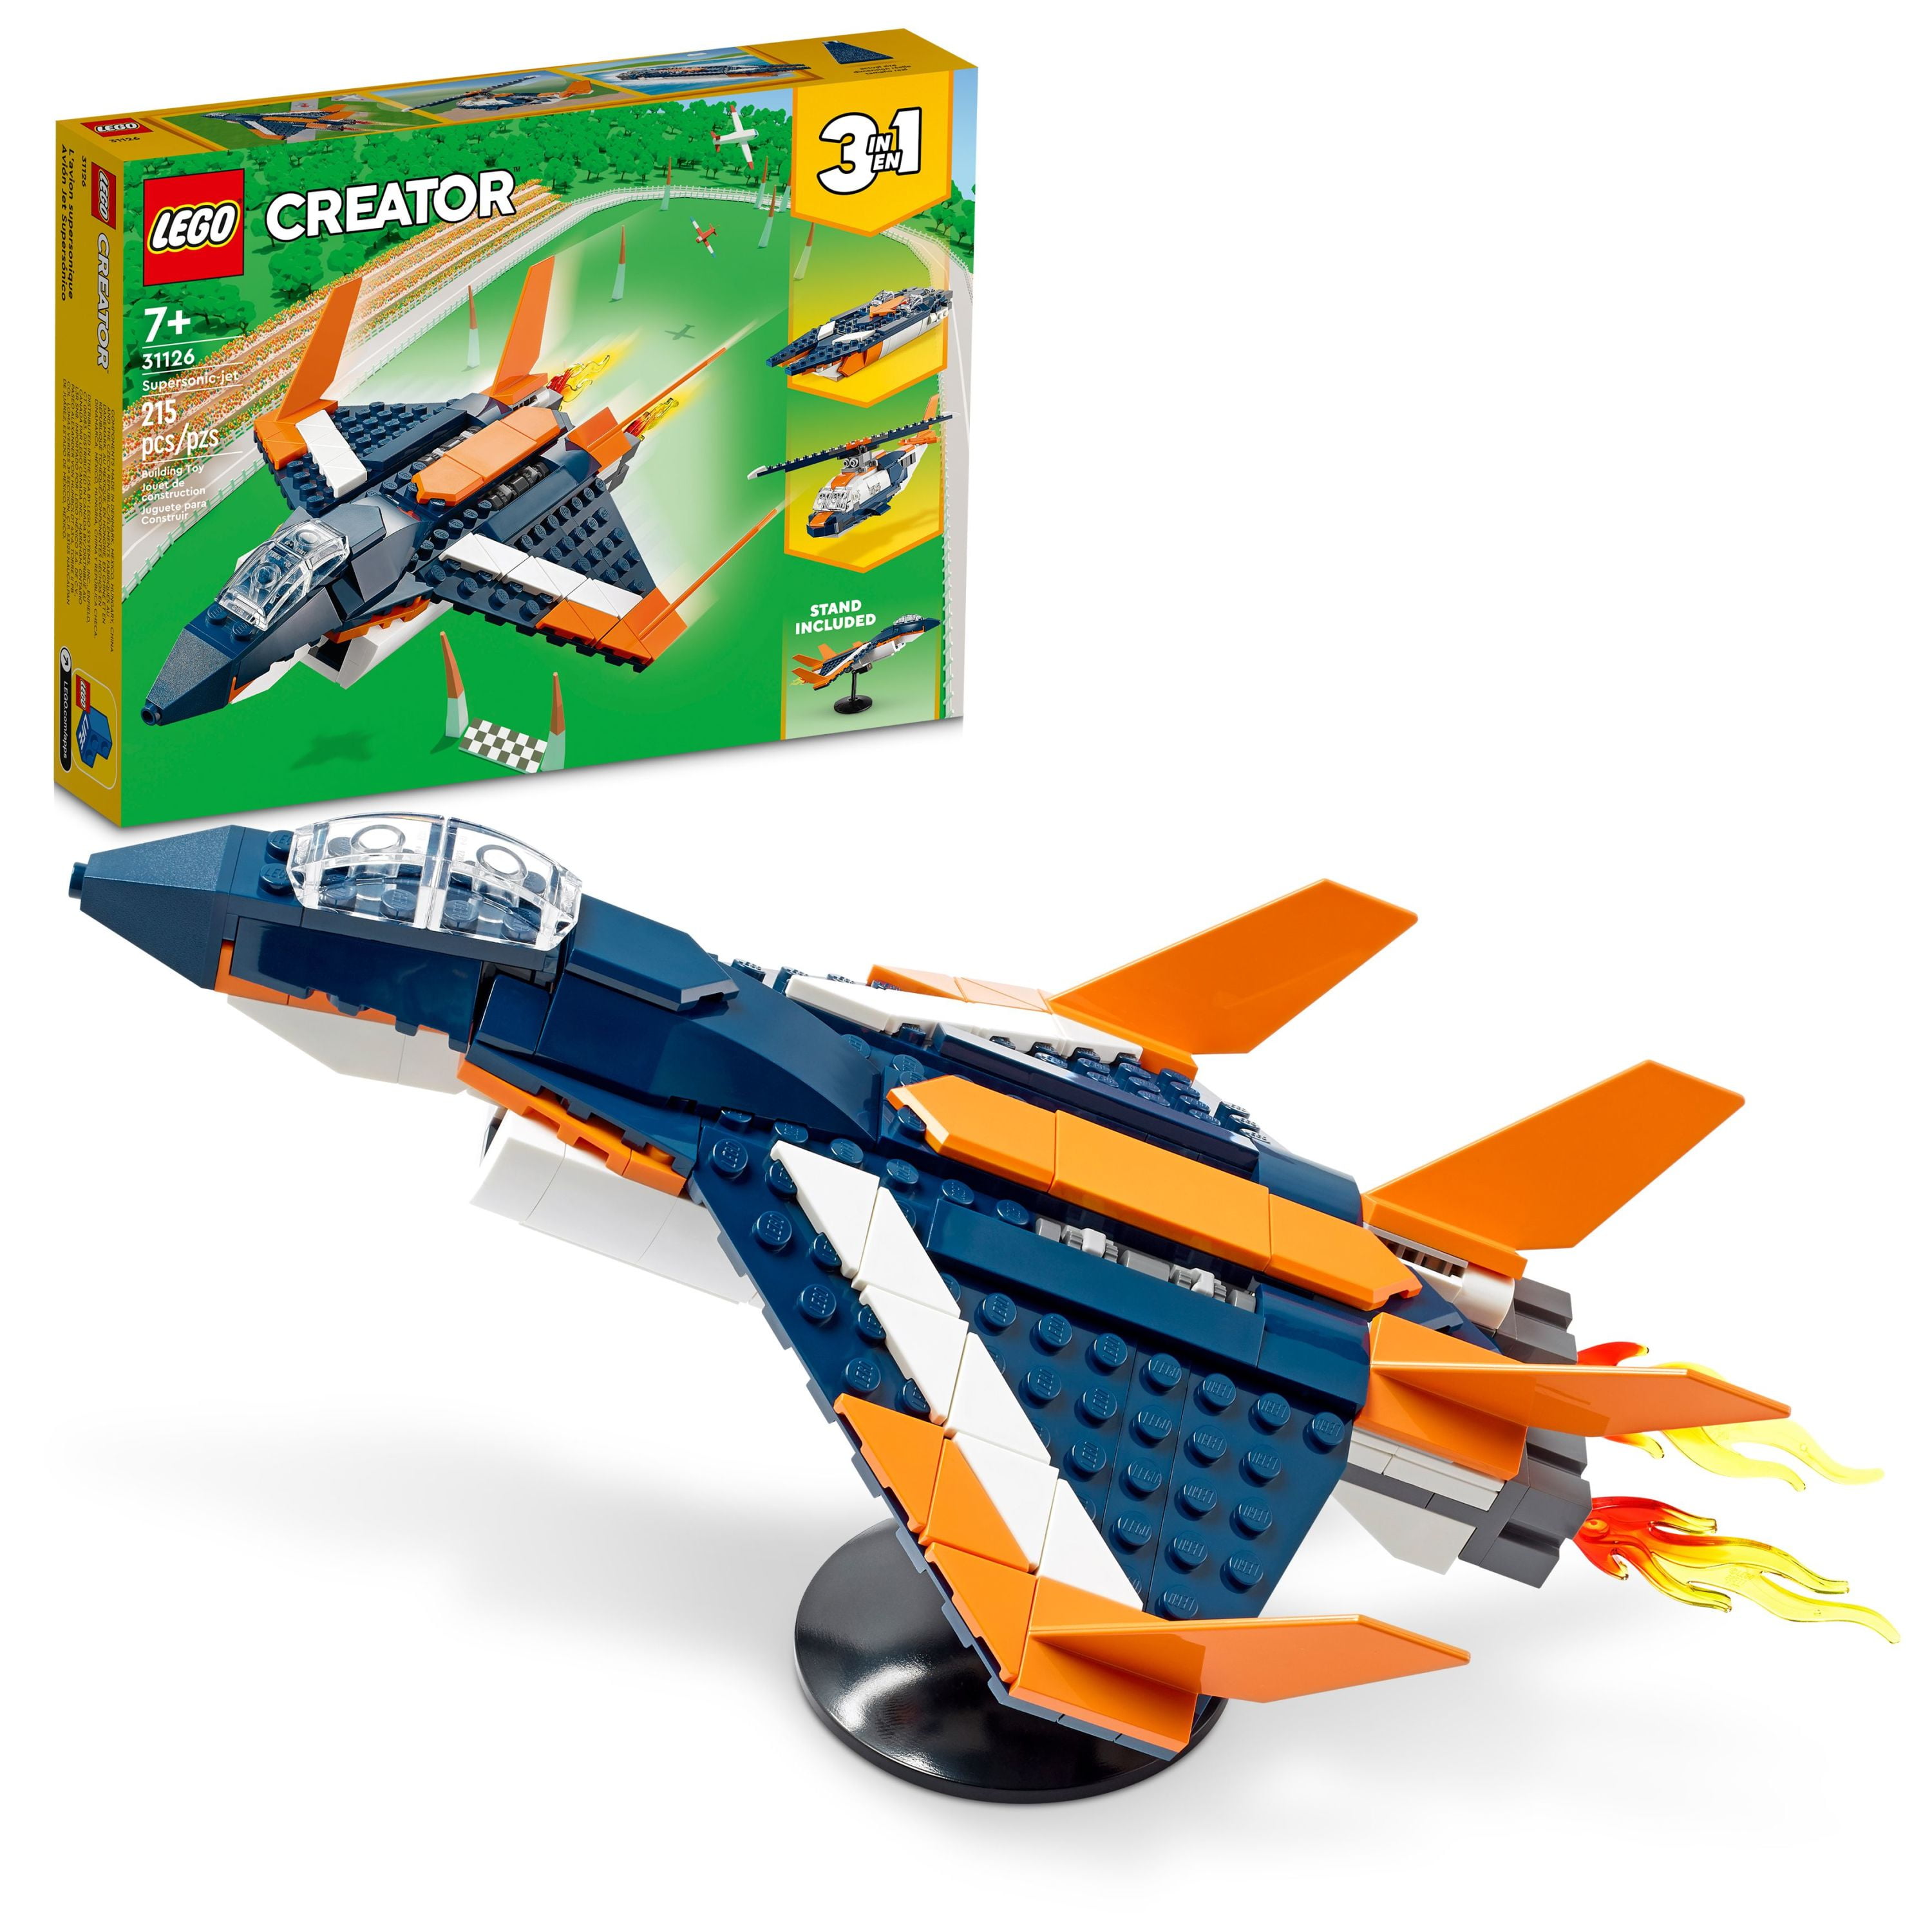 LEGO Creator 3in1 Supersonic Jet Plane to Helicopter to Speed Boat Toy Set  31126, Buildable Vehicle Models for Kids, Boys and Girls 7 Plus Years Old -  